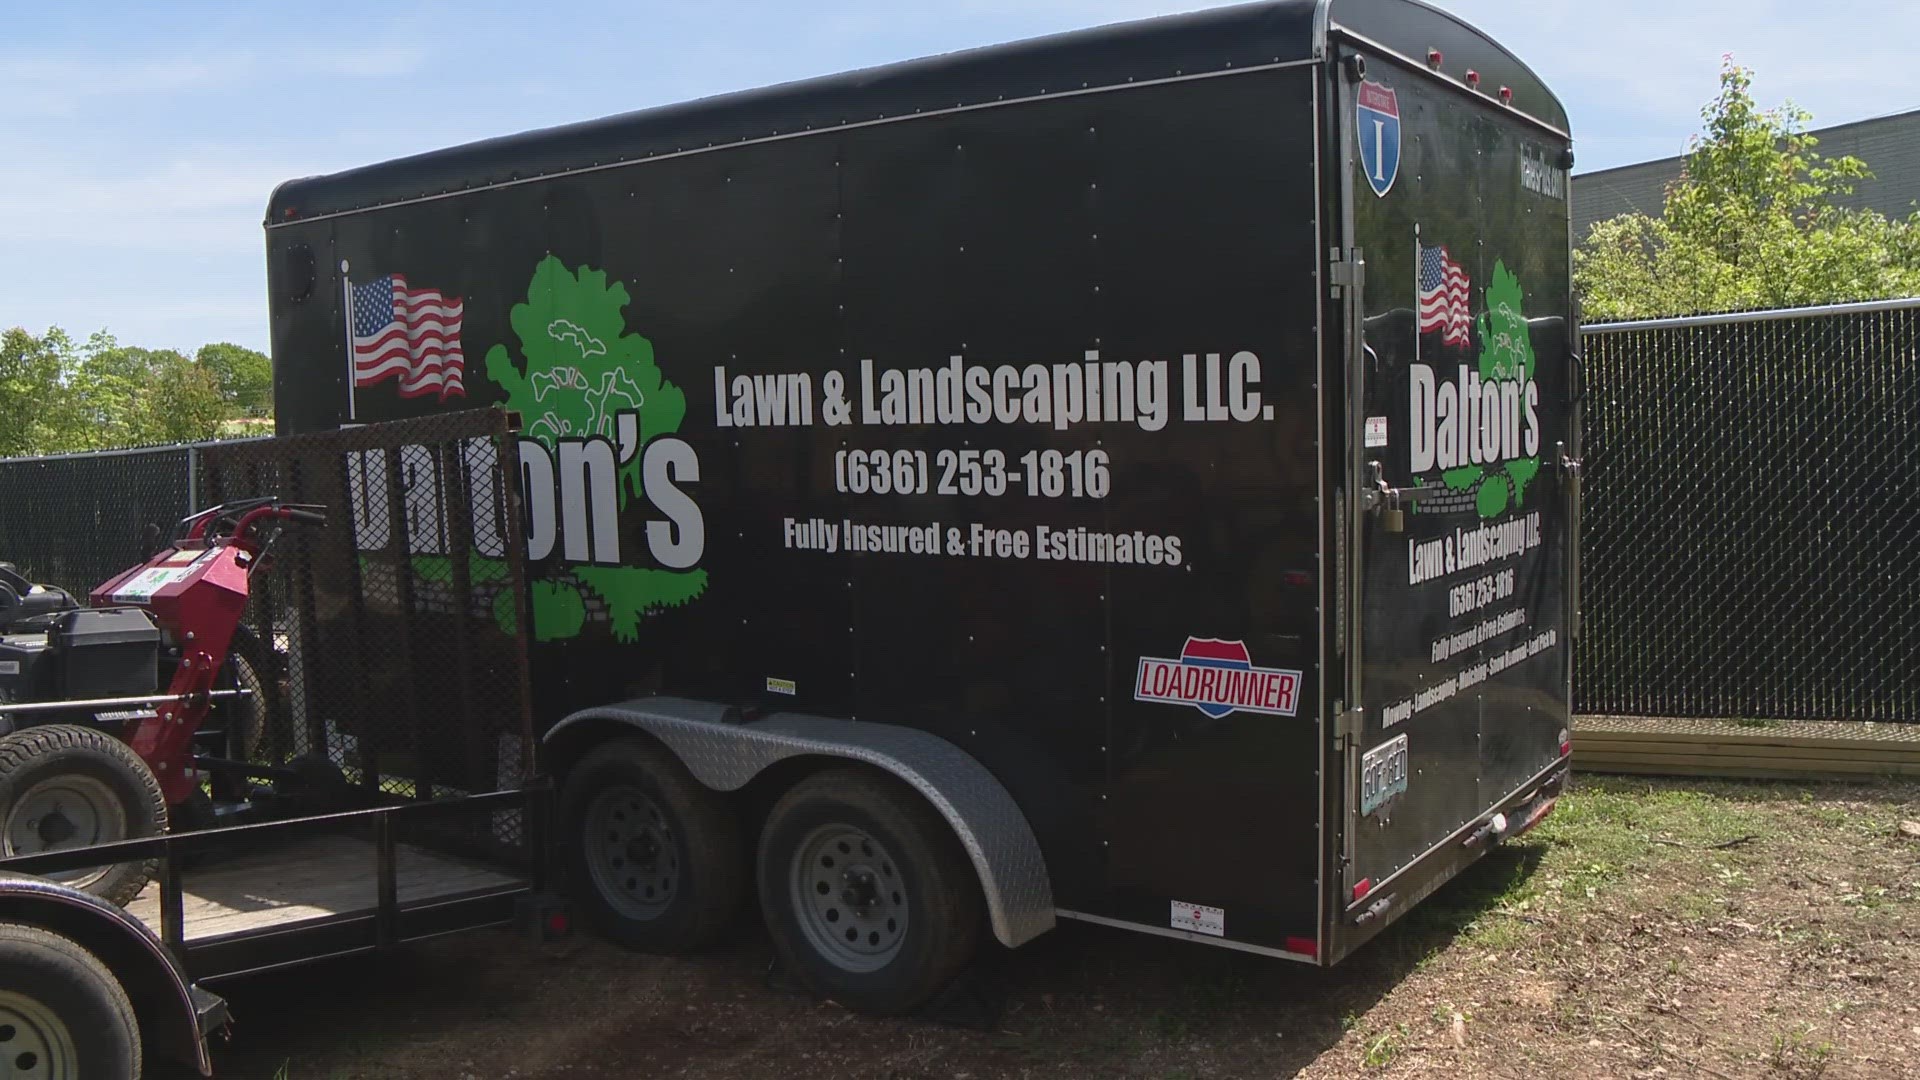 A Jefferson County business owner is out thousands of dollars worth of equipment after thieves took off with it. The theft happened in High Ridge, Missouri.